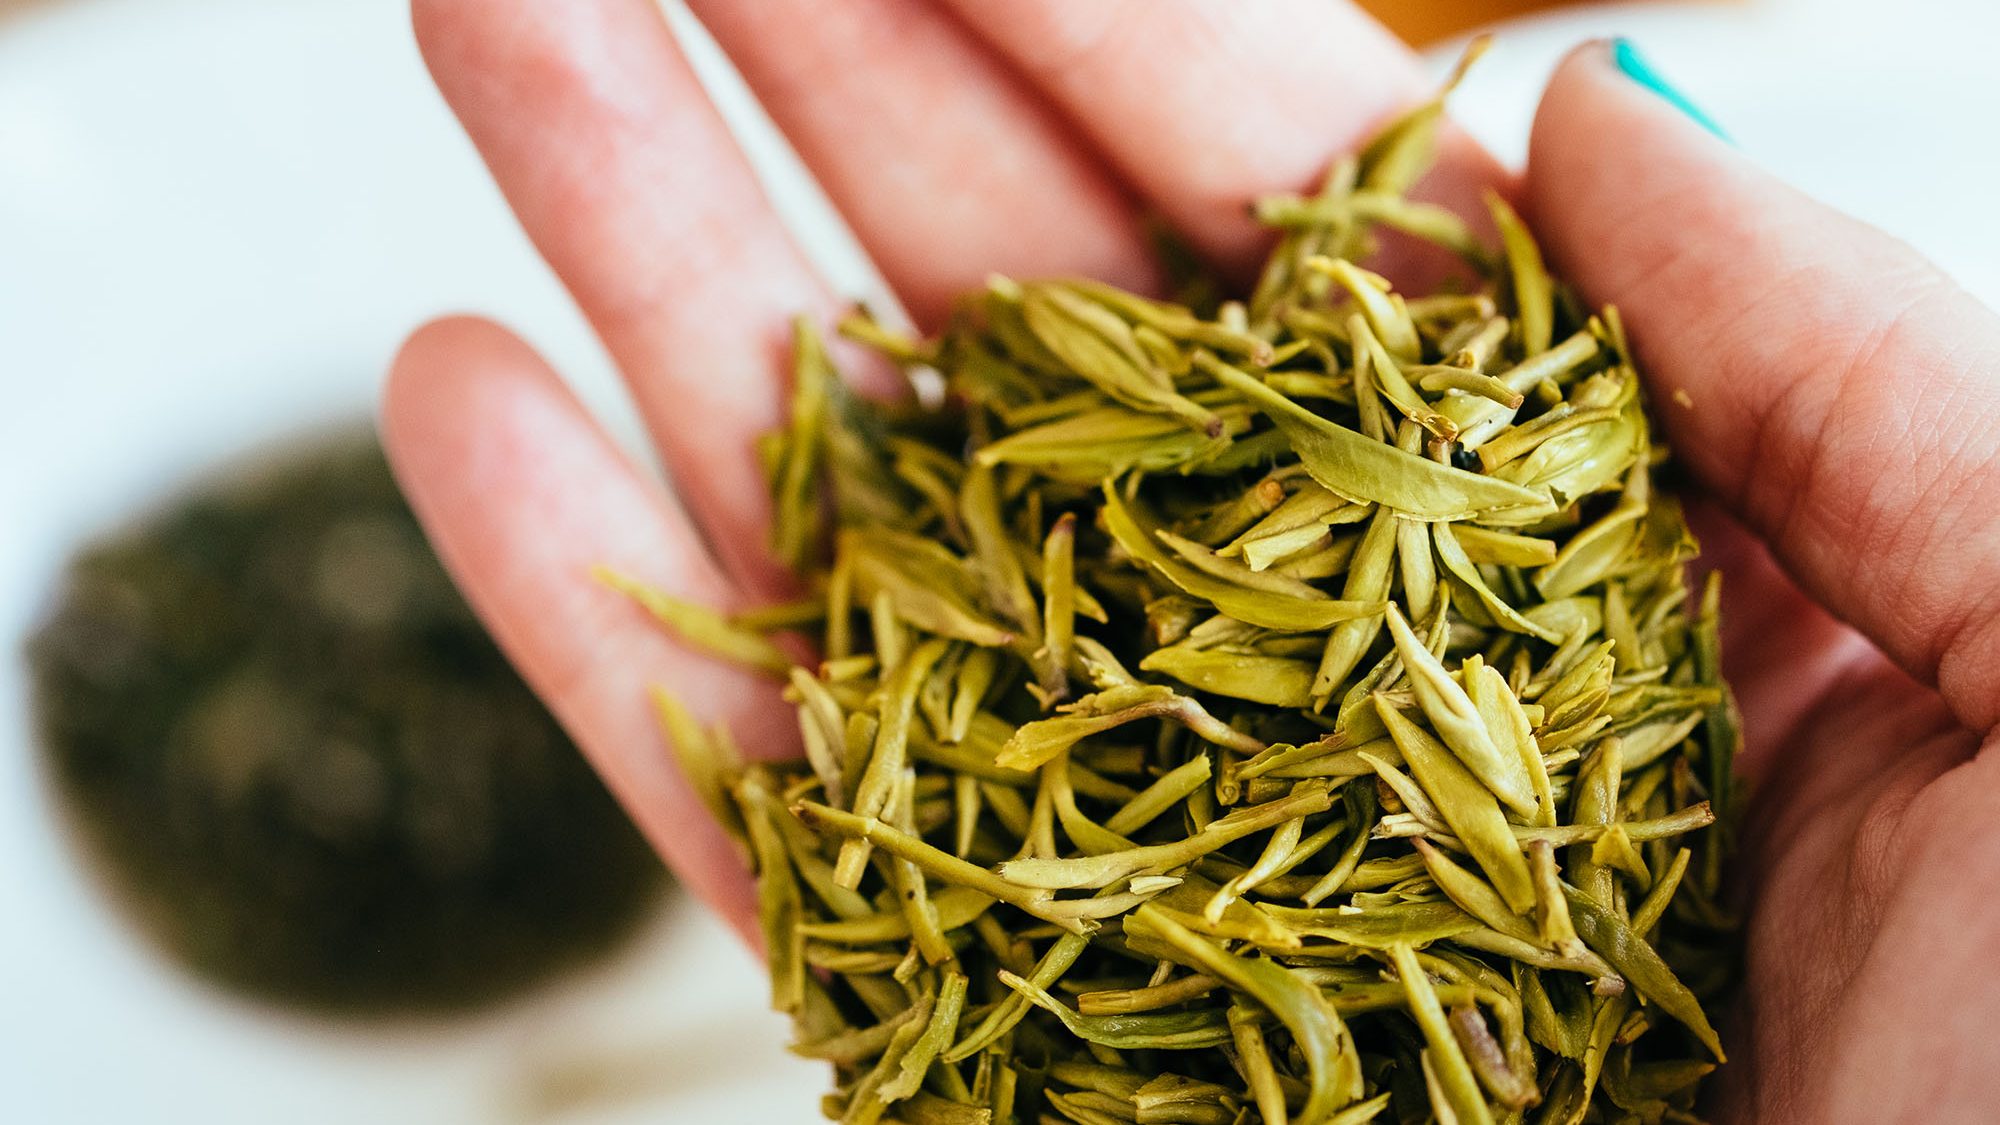 This is Baihao Yinzhen, also known as White Hair Silver Needle tea. It's a white tea and is considered a 'specialty tea'.